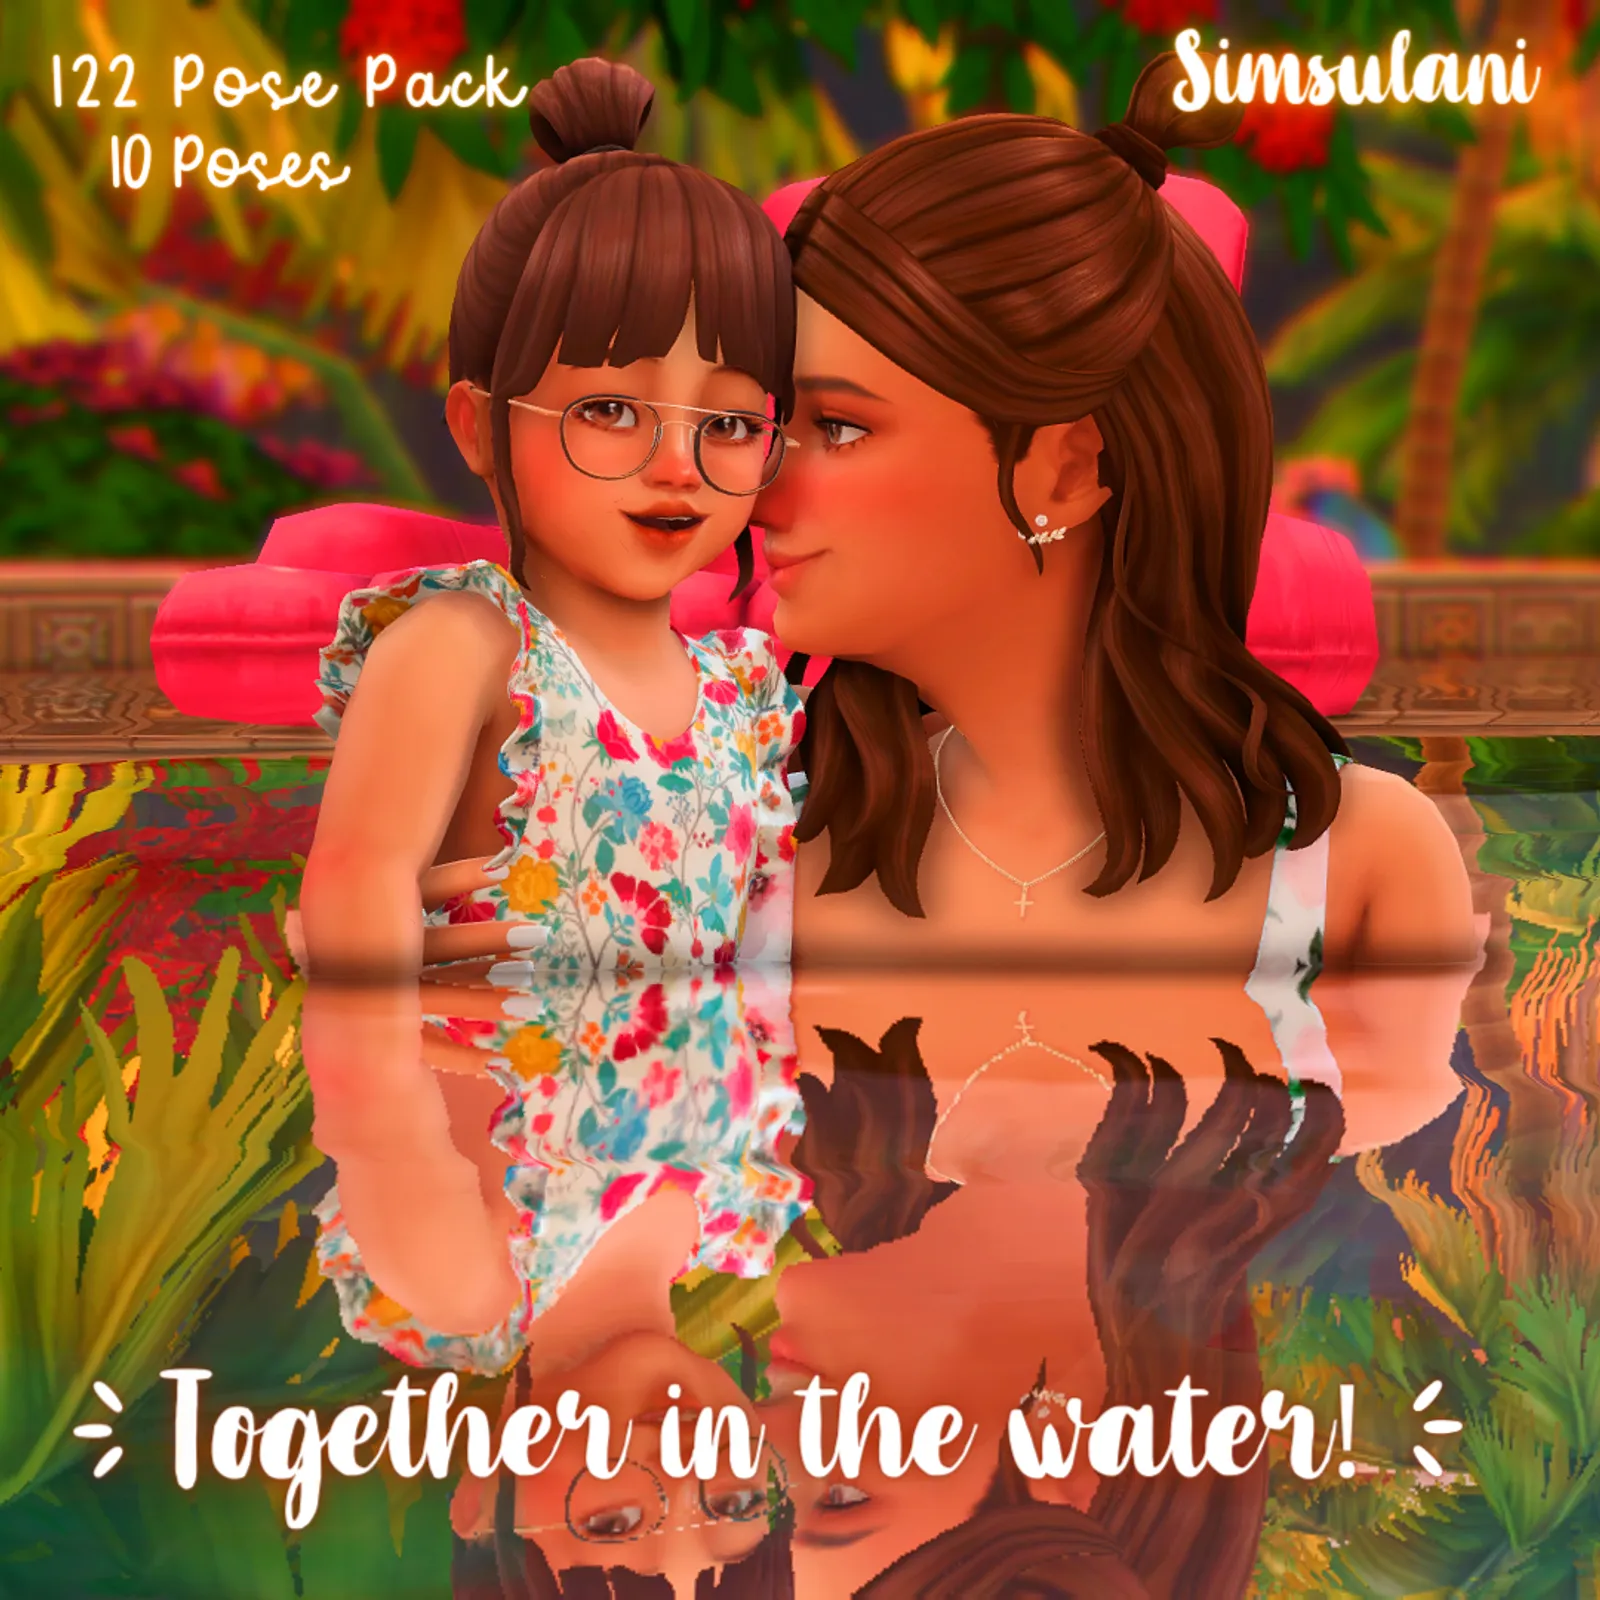 #122 Pose Pack "Together in the water" ?